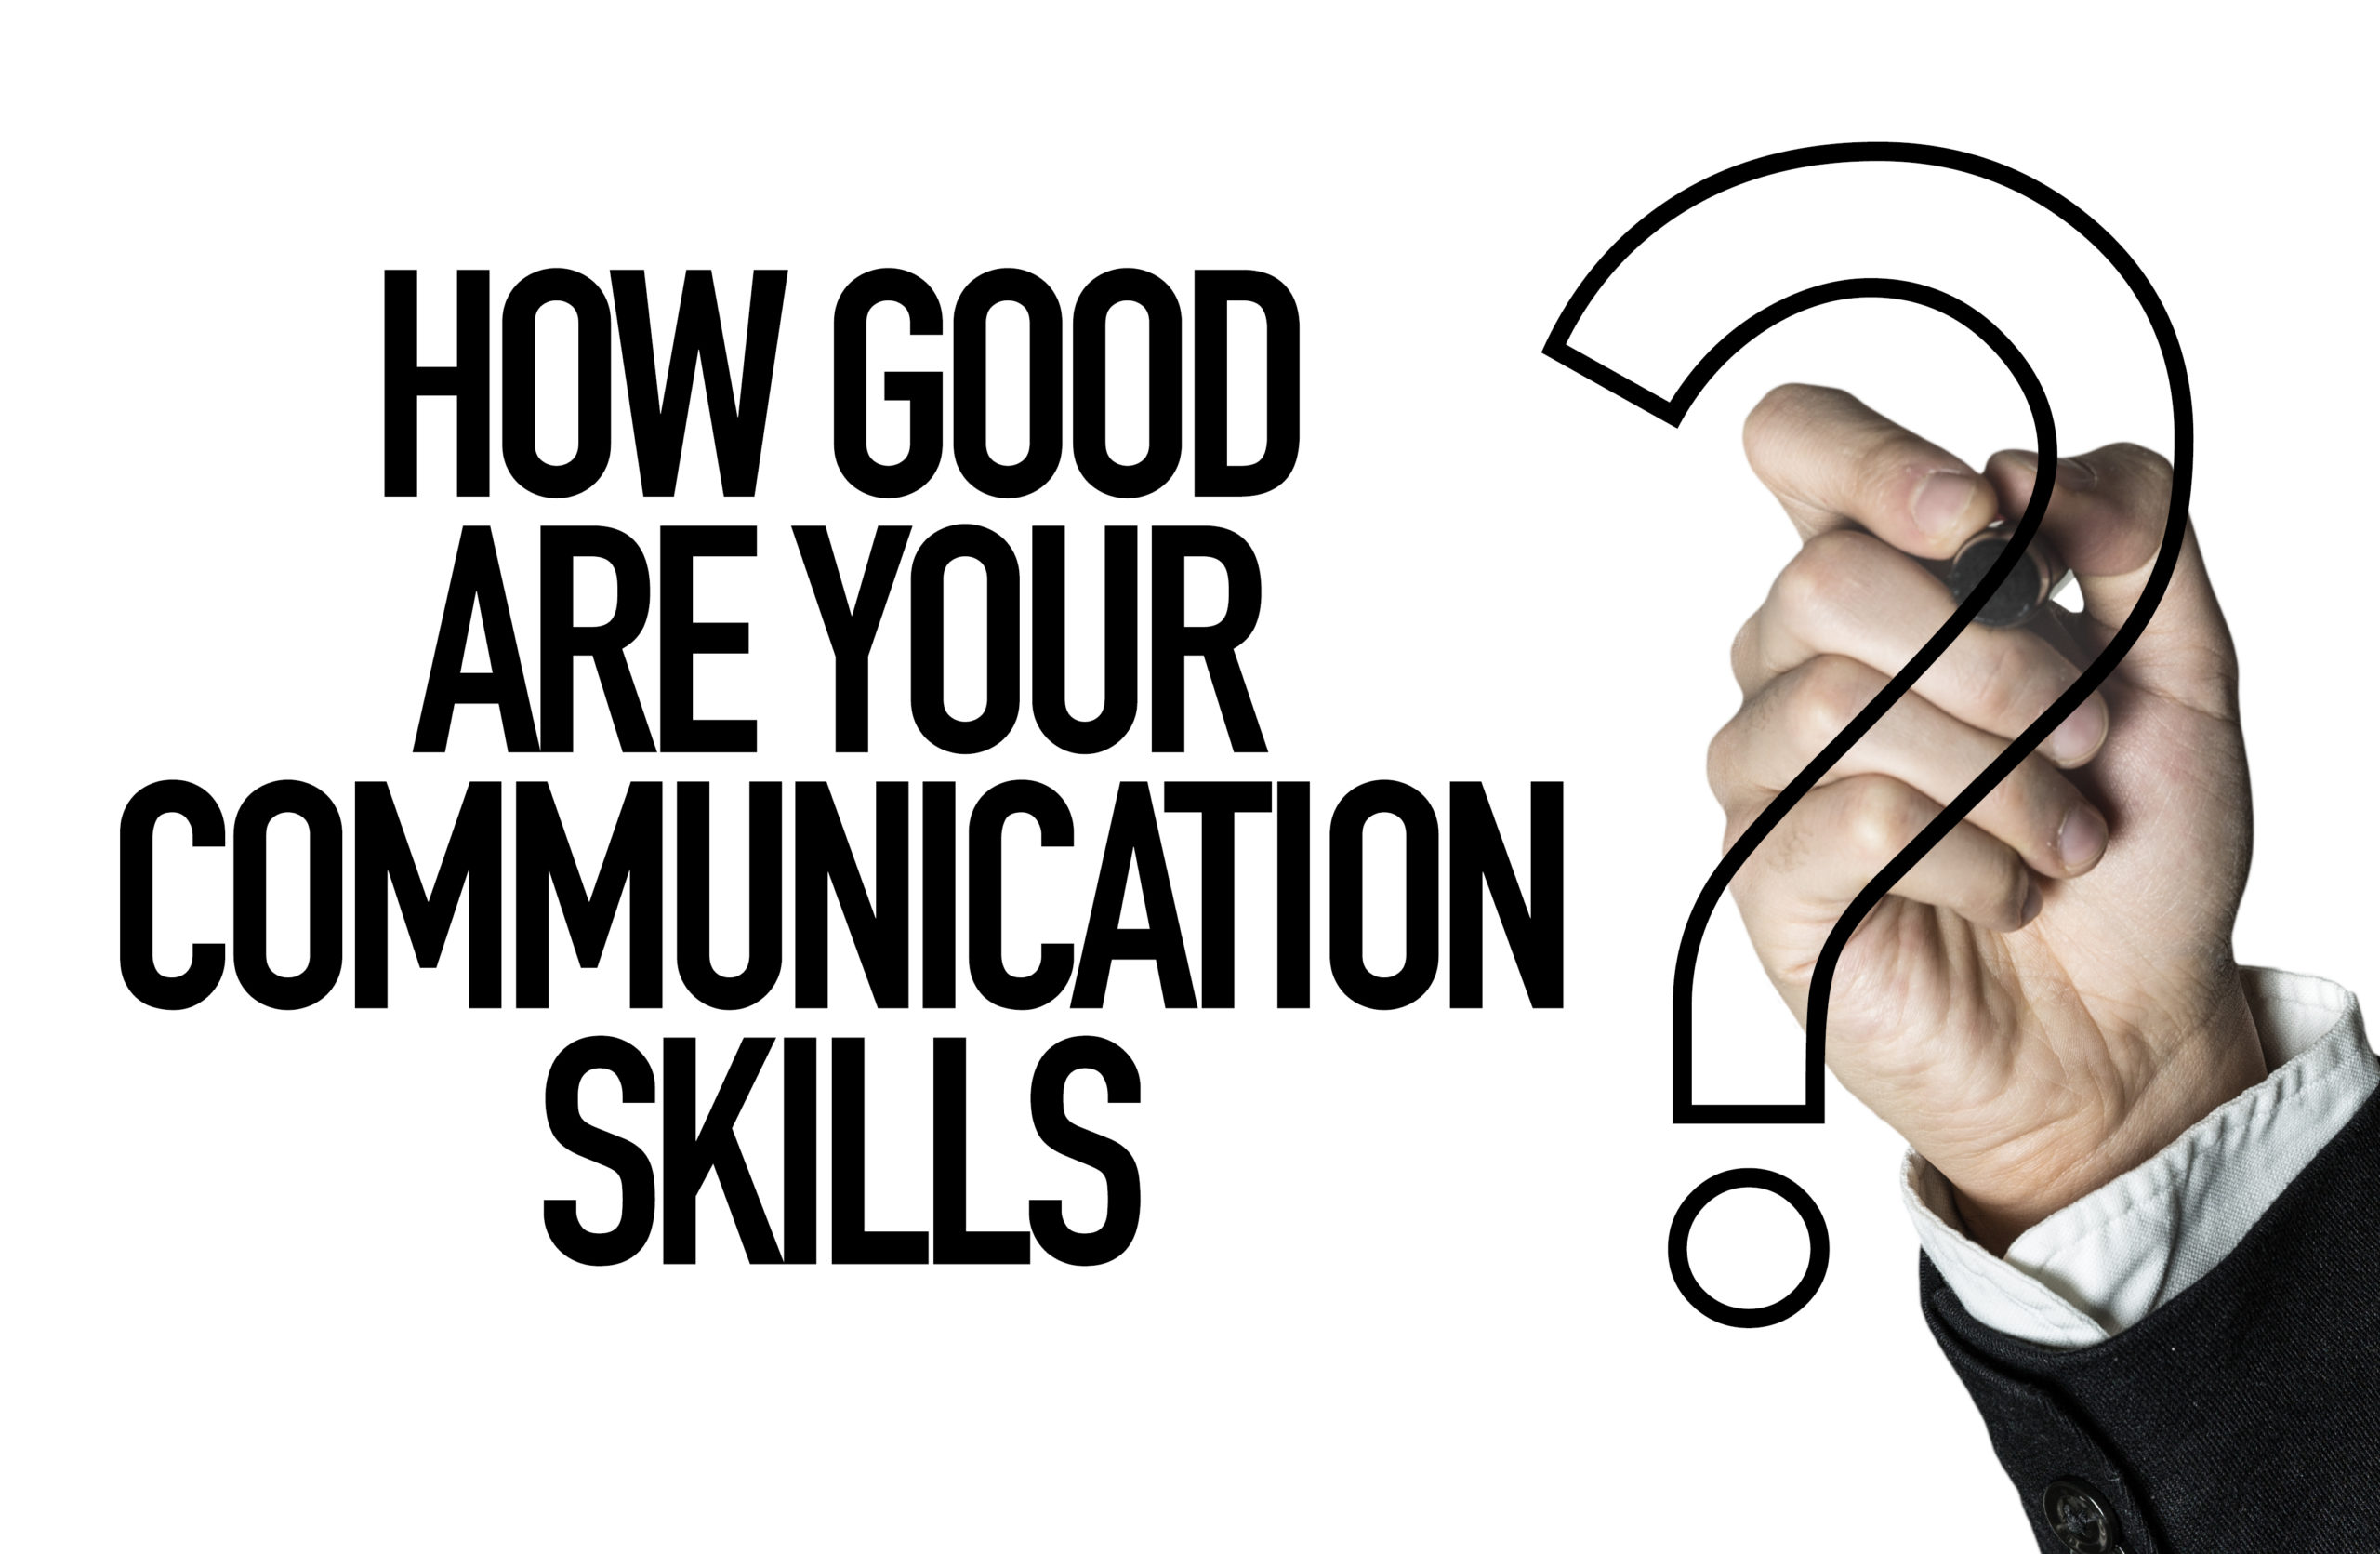 How Good Are Your Communication Skills?